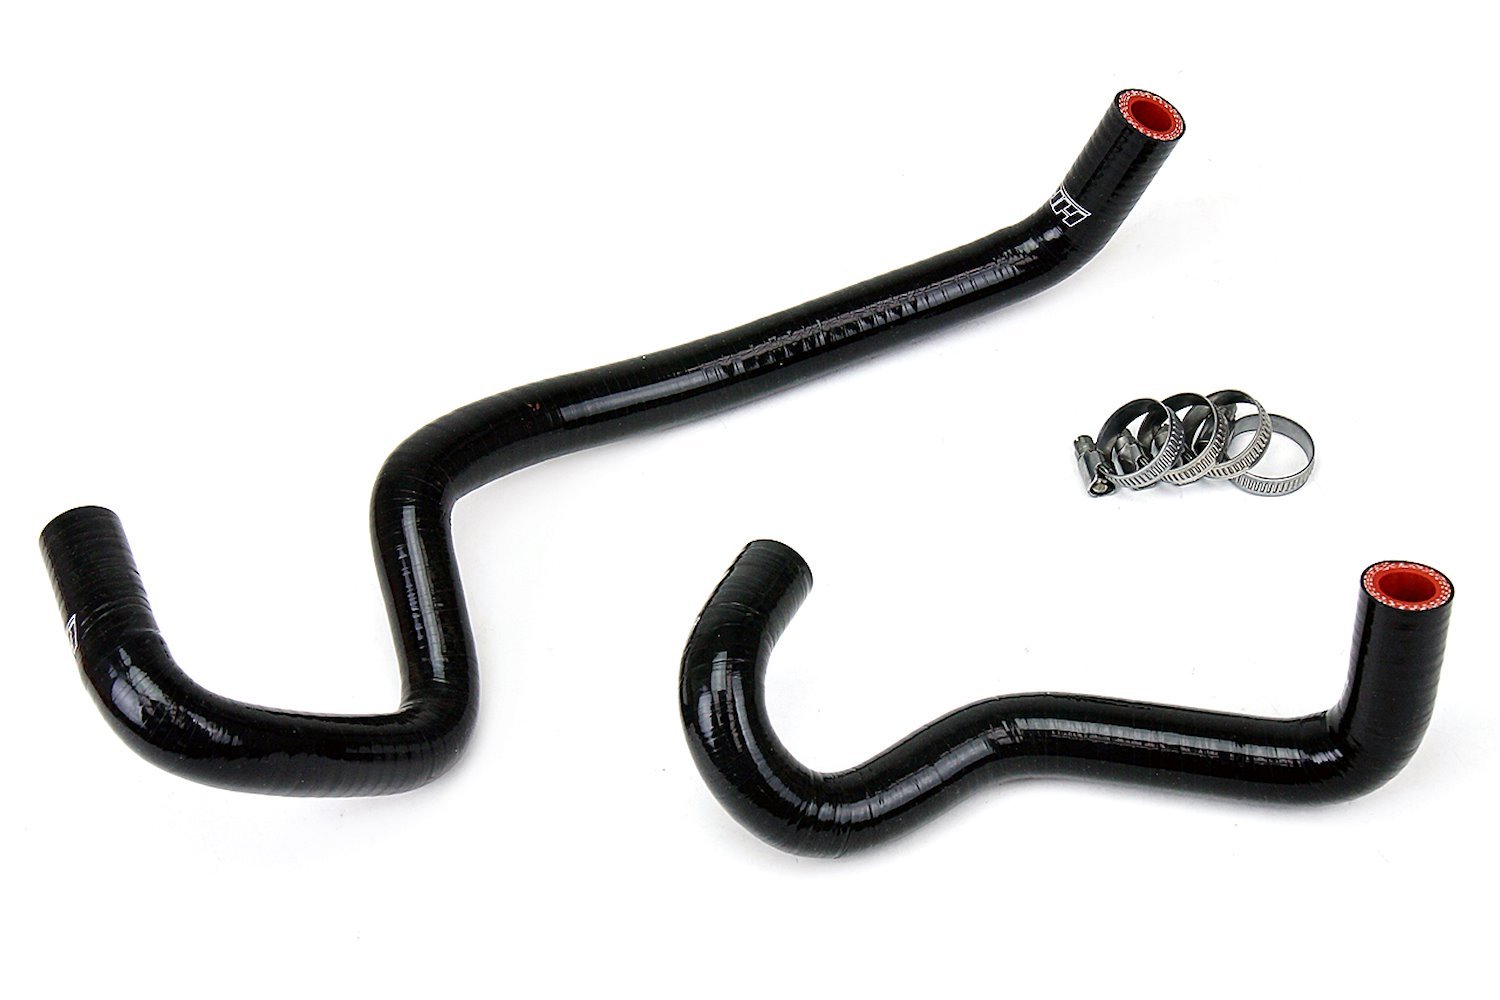 57-1467H-BLK Heater Hose Kit, High-Temp 3-Ply Reinforced Silicone, Replace OEM Rubber Heater Coolant Hoses